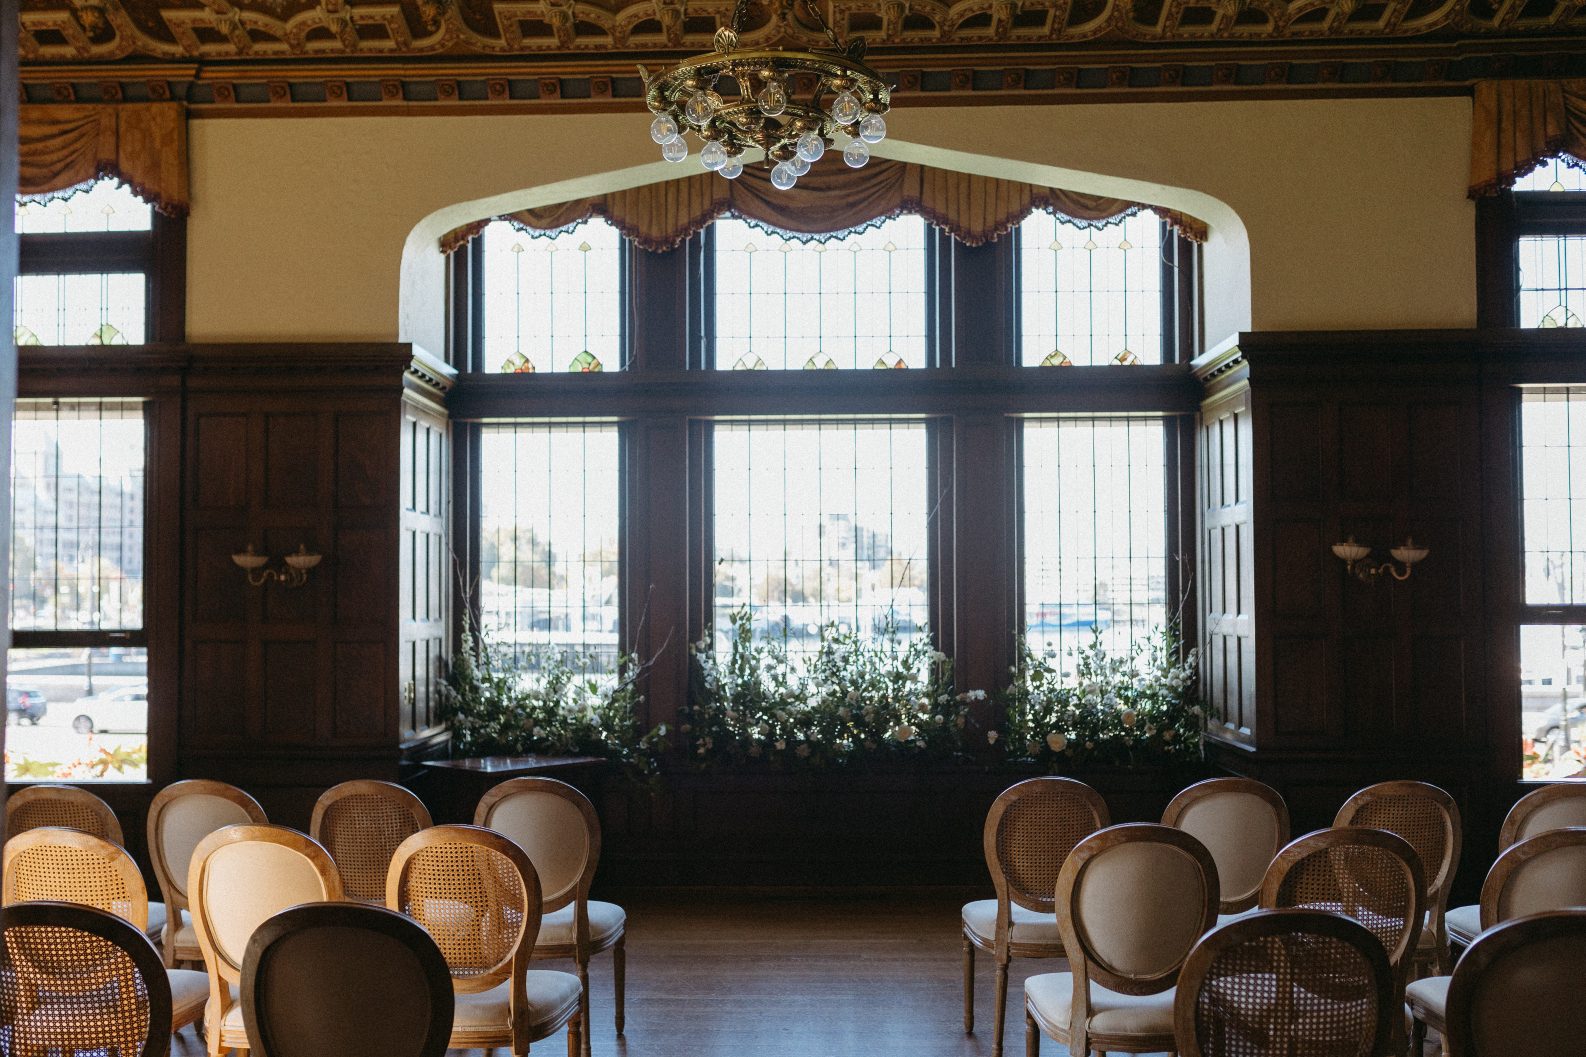 A view of the ceremony location, the library of the Fairmont Empress in Victoria. Large windows as the backdrop, with large white and green arrangements at the base.